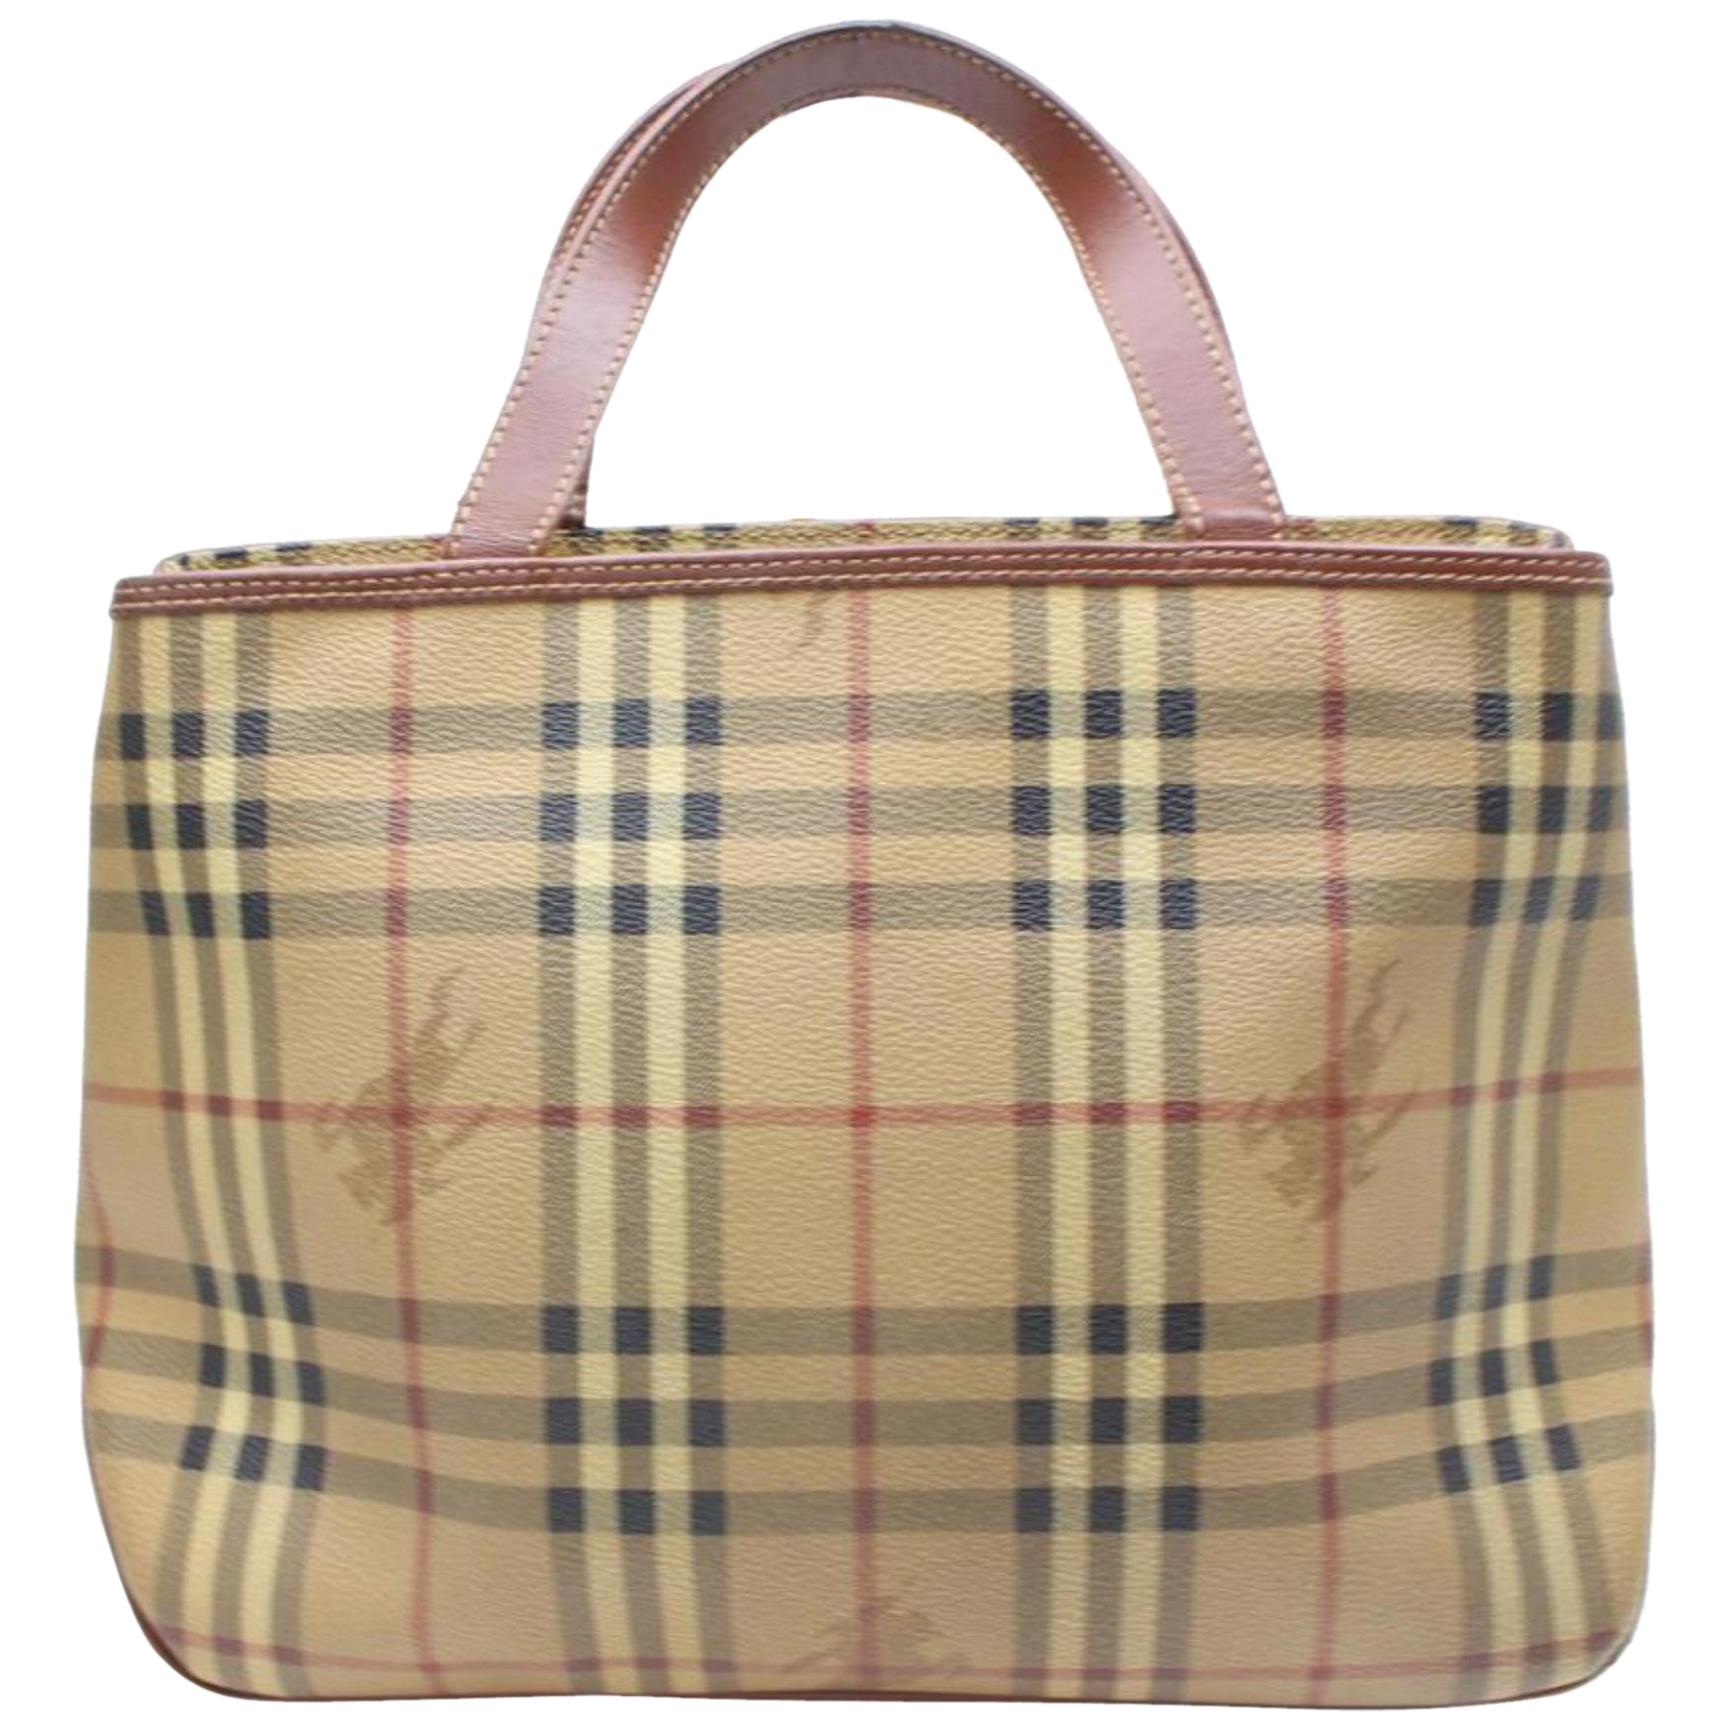 Burberry London Nova Check Haymarket 868375 Brown Coated Canvas Tote For Sale